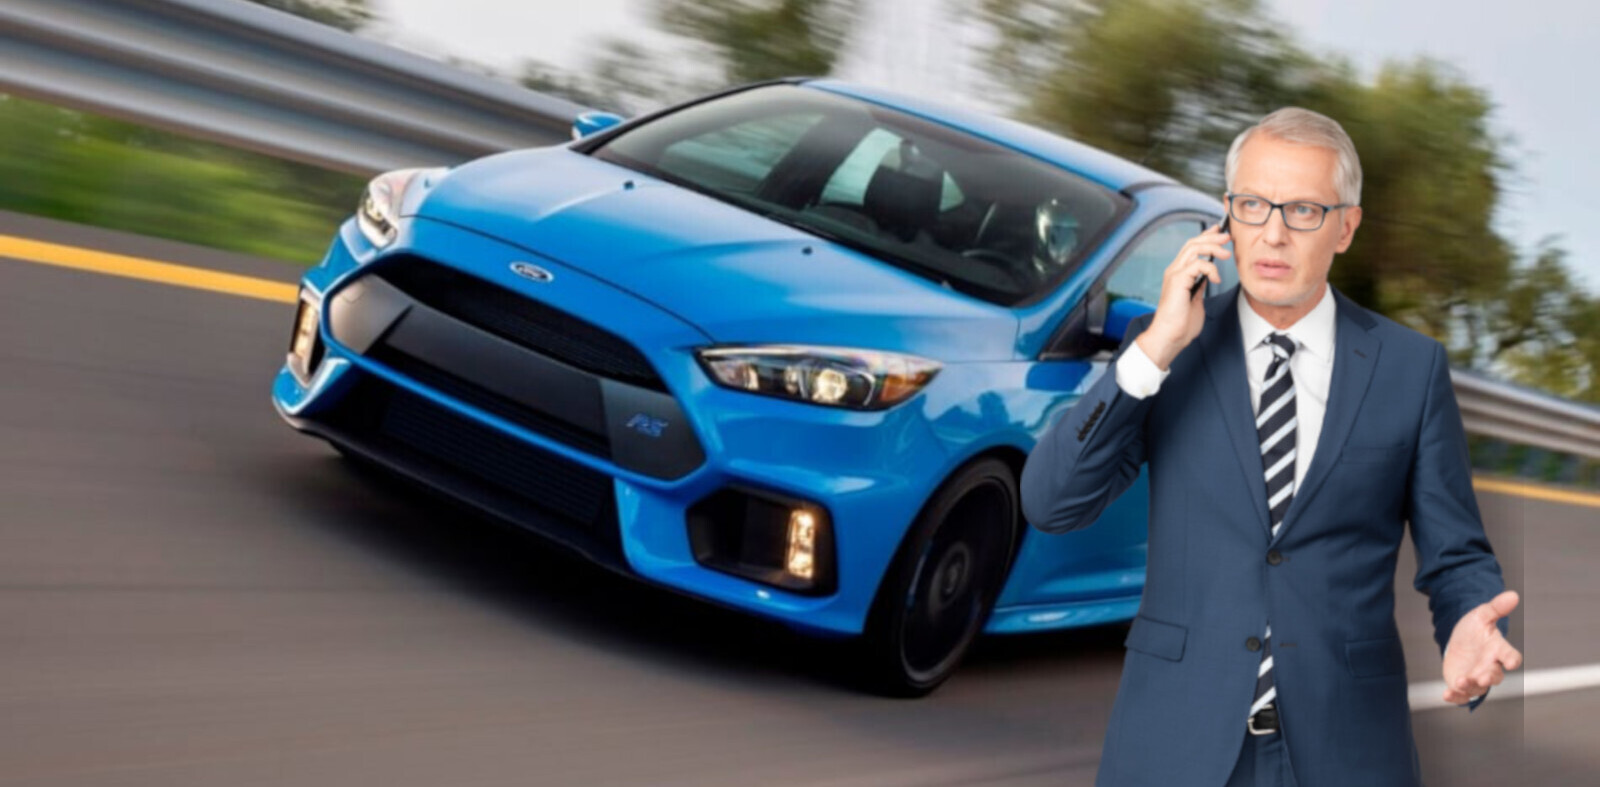 CO2 regulations hold up the crazy fast Ford Focus RS until 2022